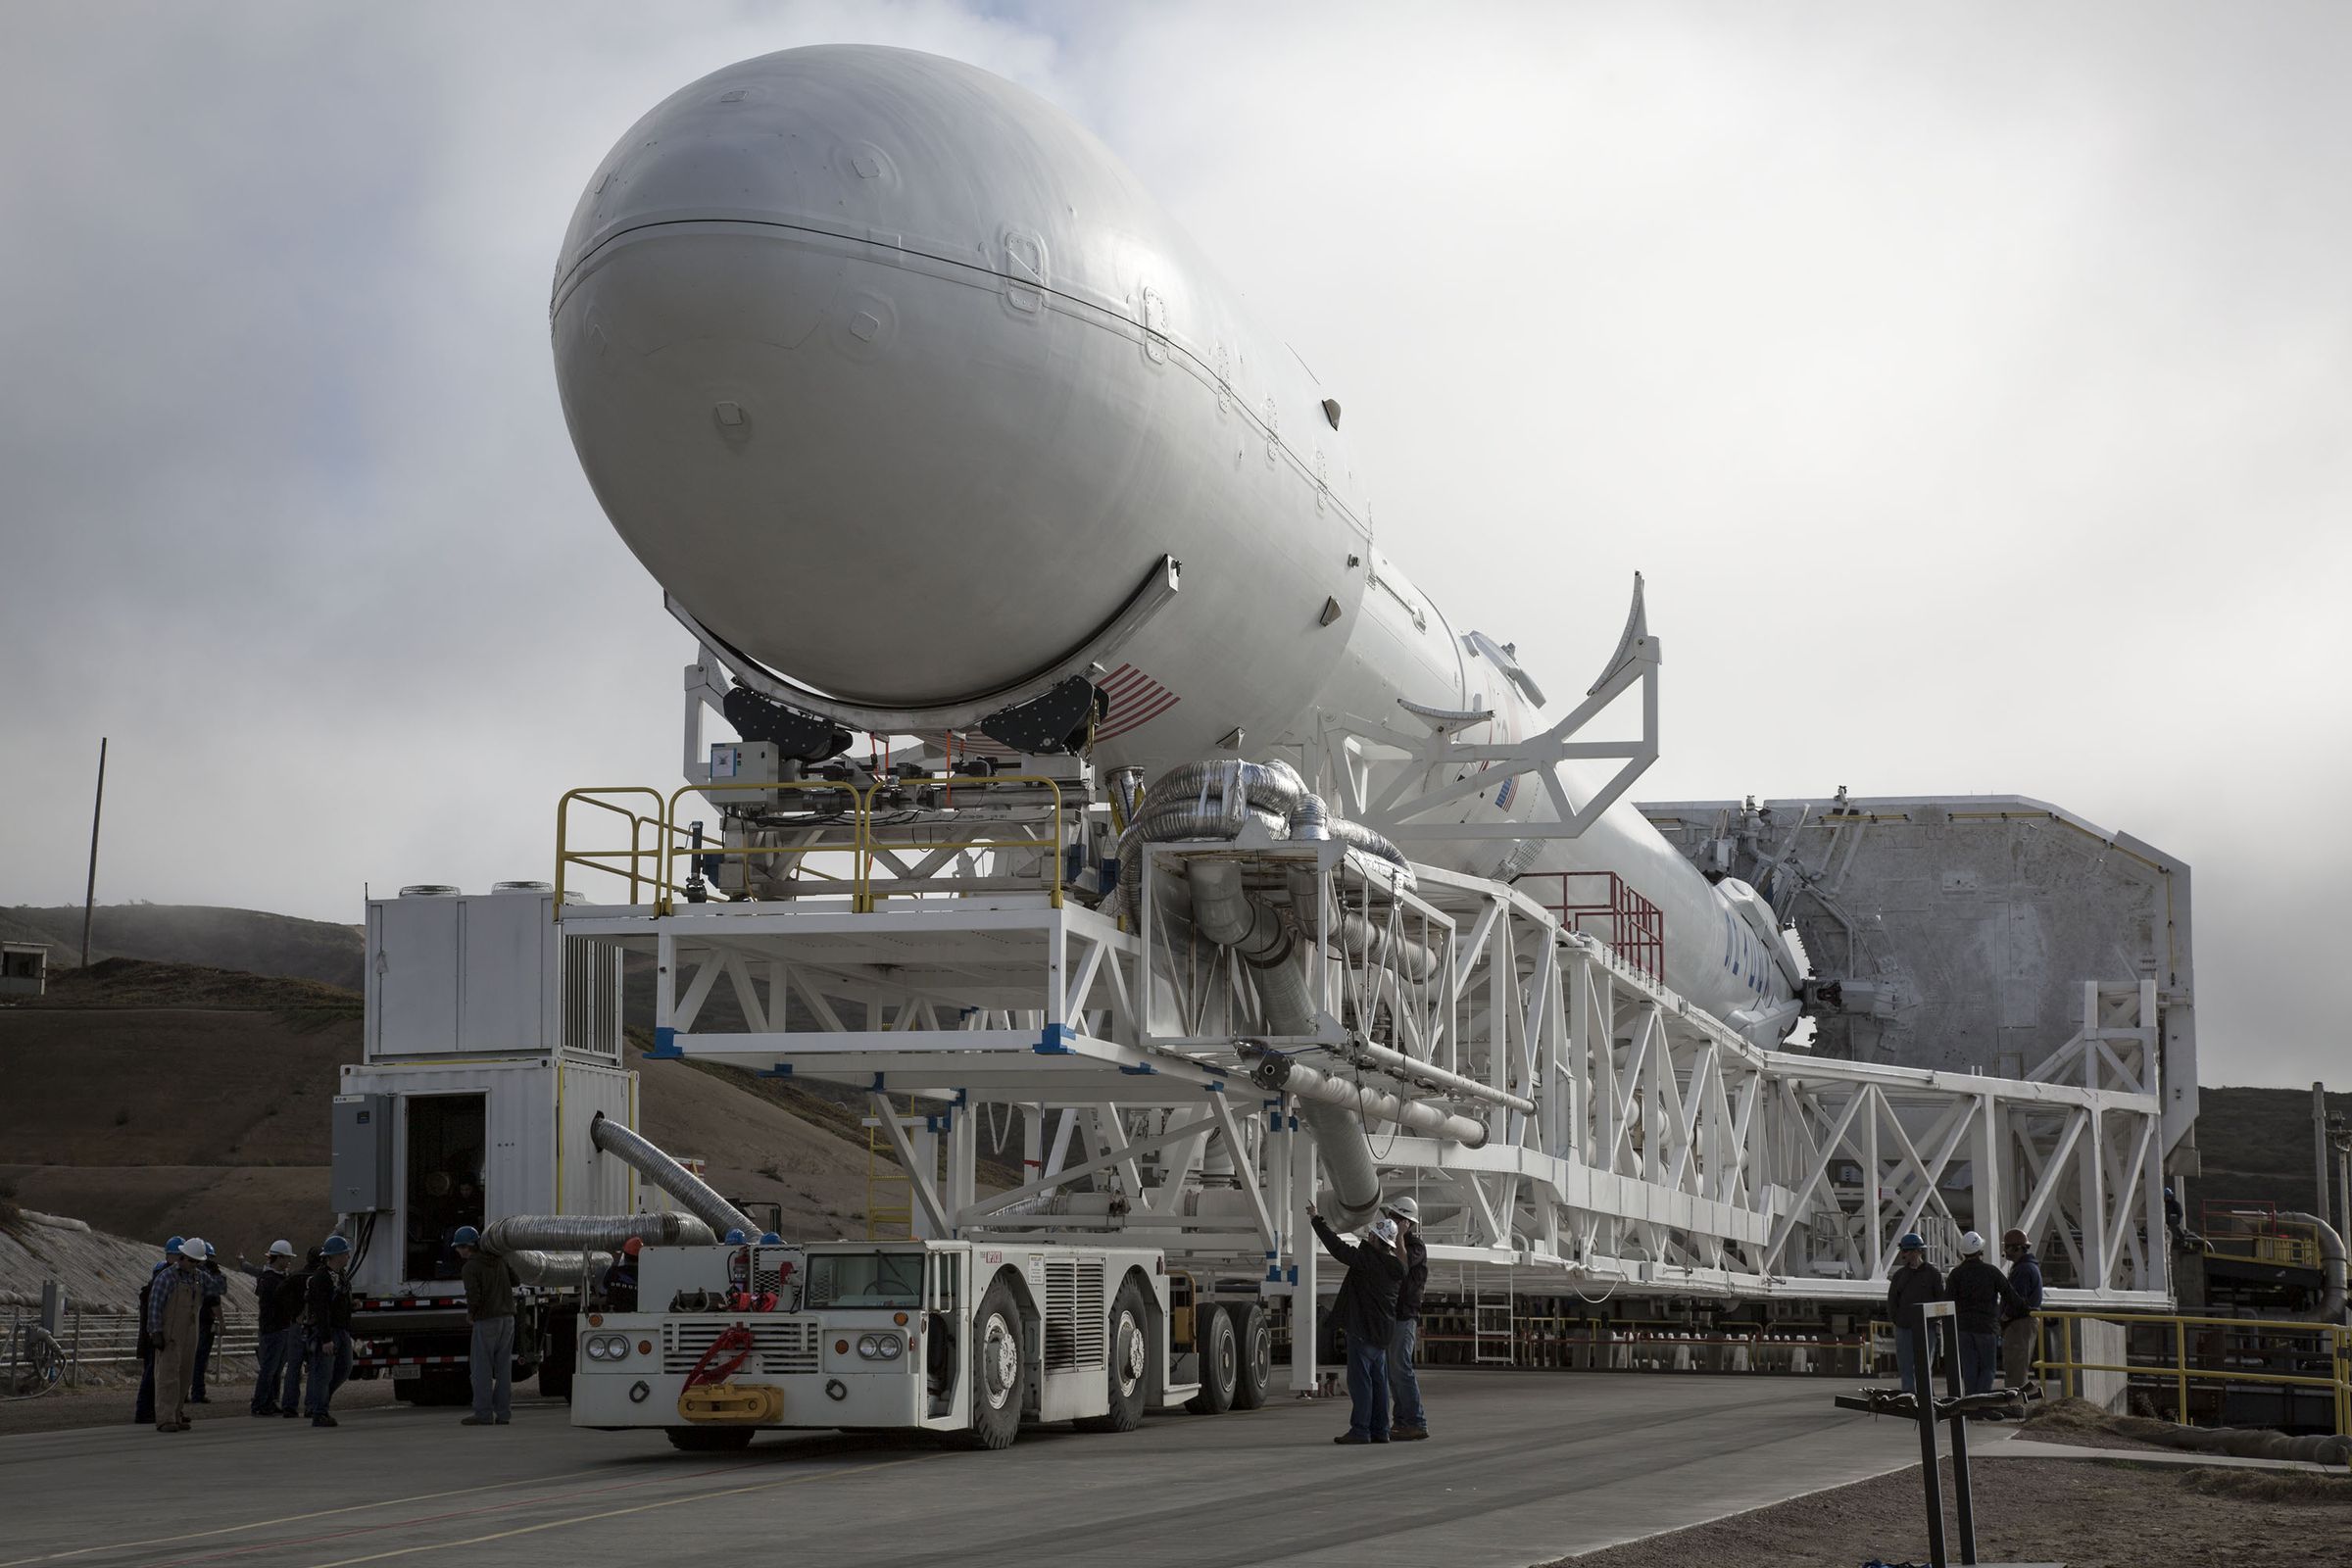 One of SpaceX’s Falcon 9 rockets rolls out to the launch pad at Vandenberg Air Force Base.